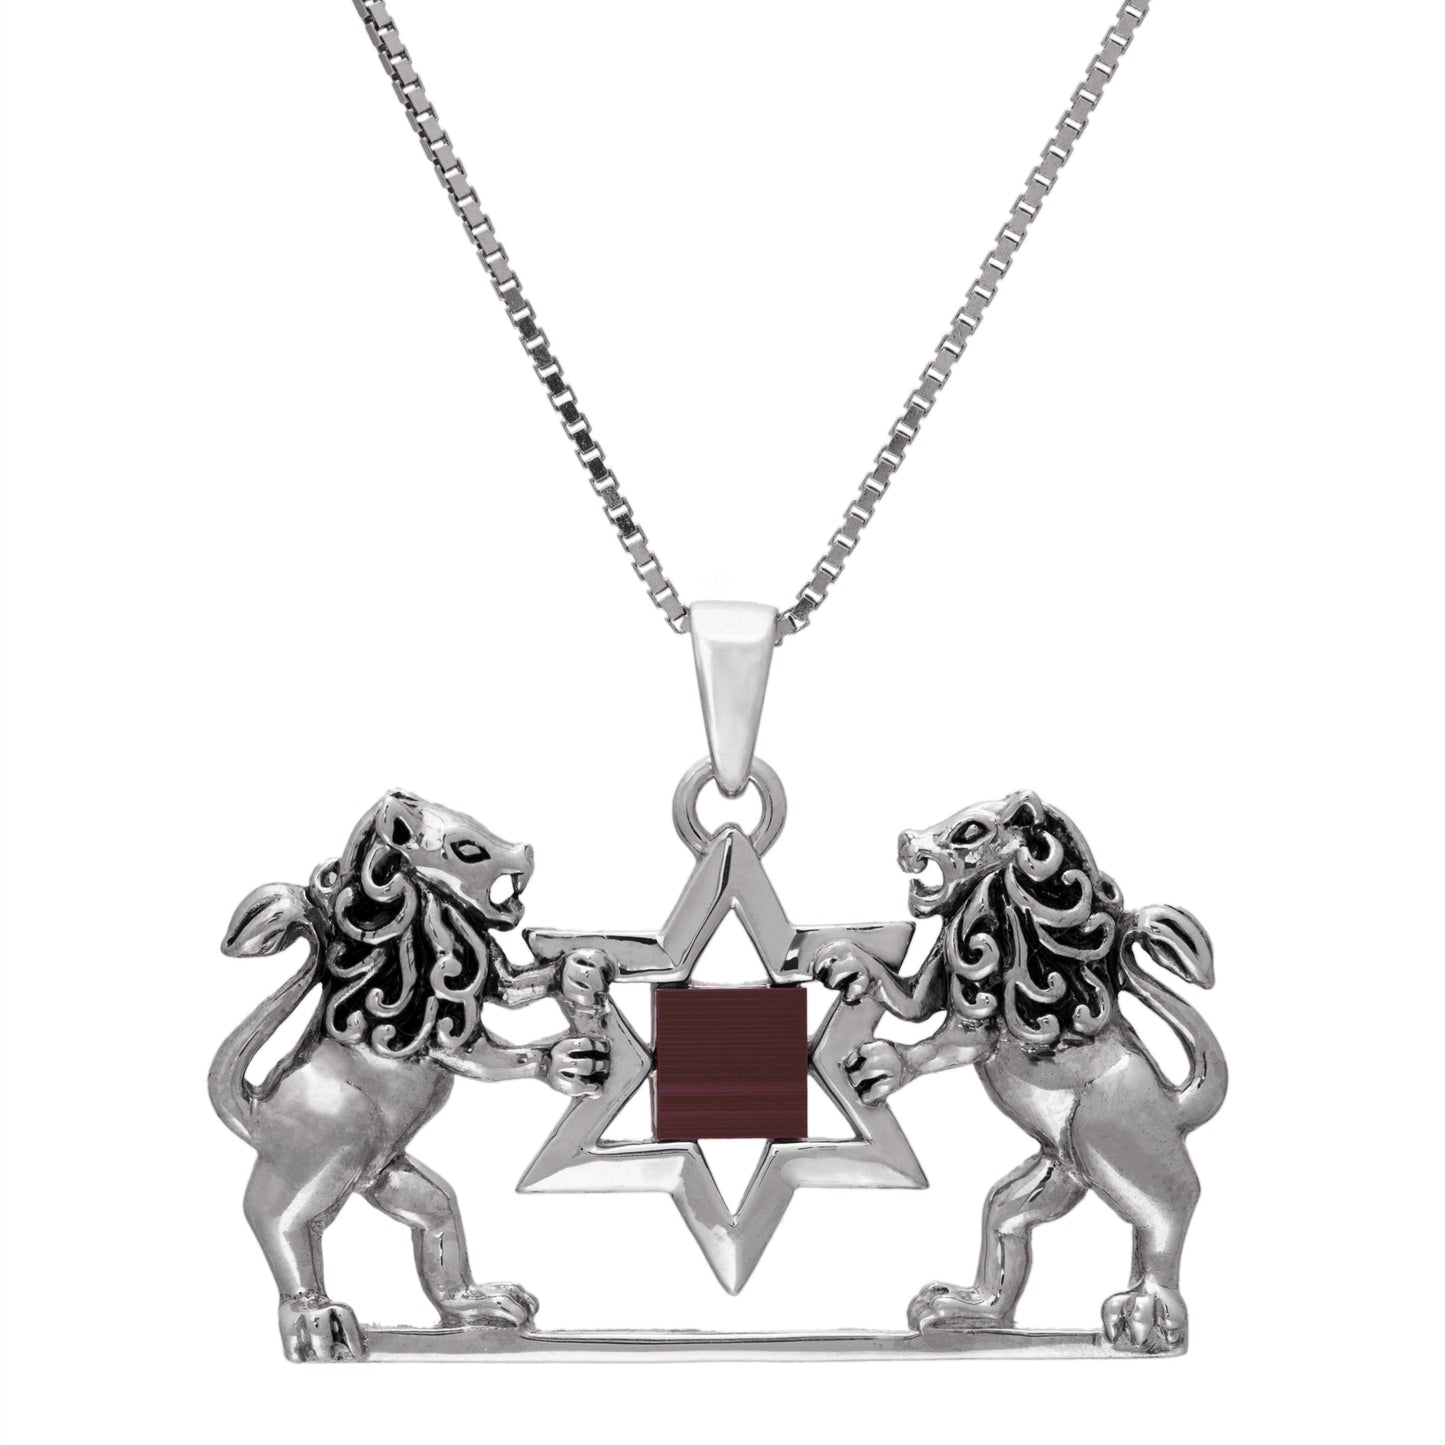 Bluenoemi Jewelry Necklaces Nano Sim Old Bible Silver Lion of Judah Pendant for woman